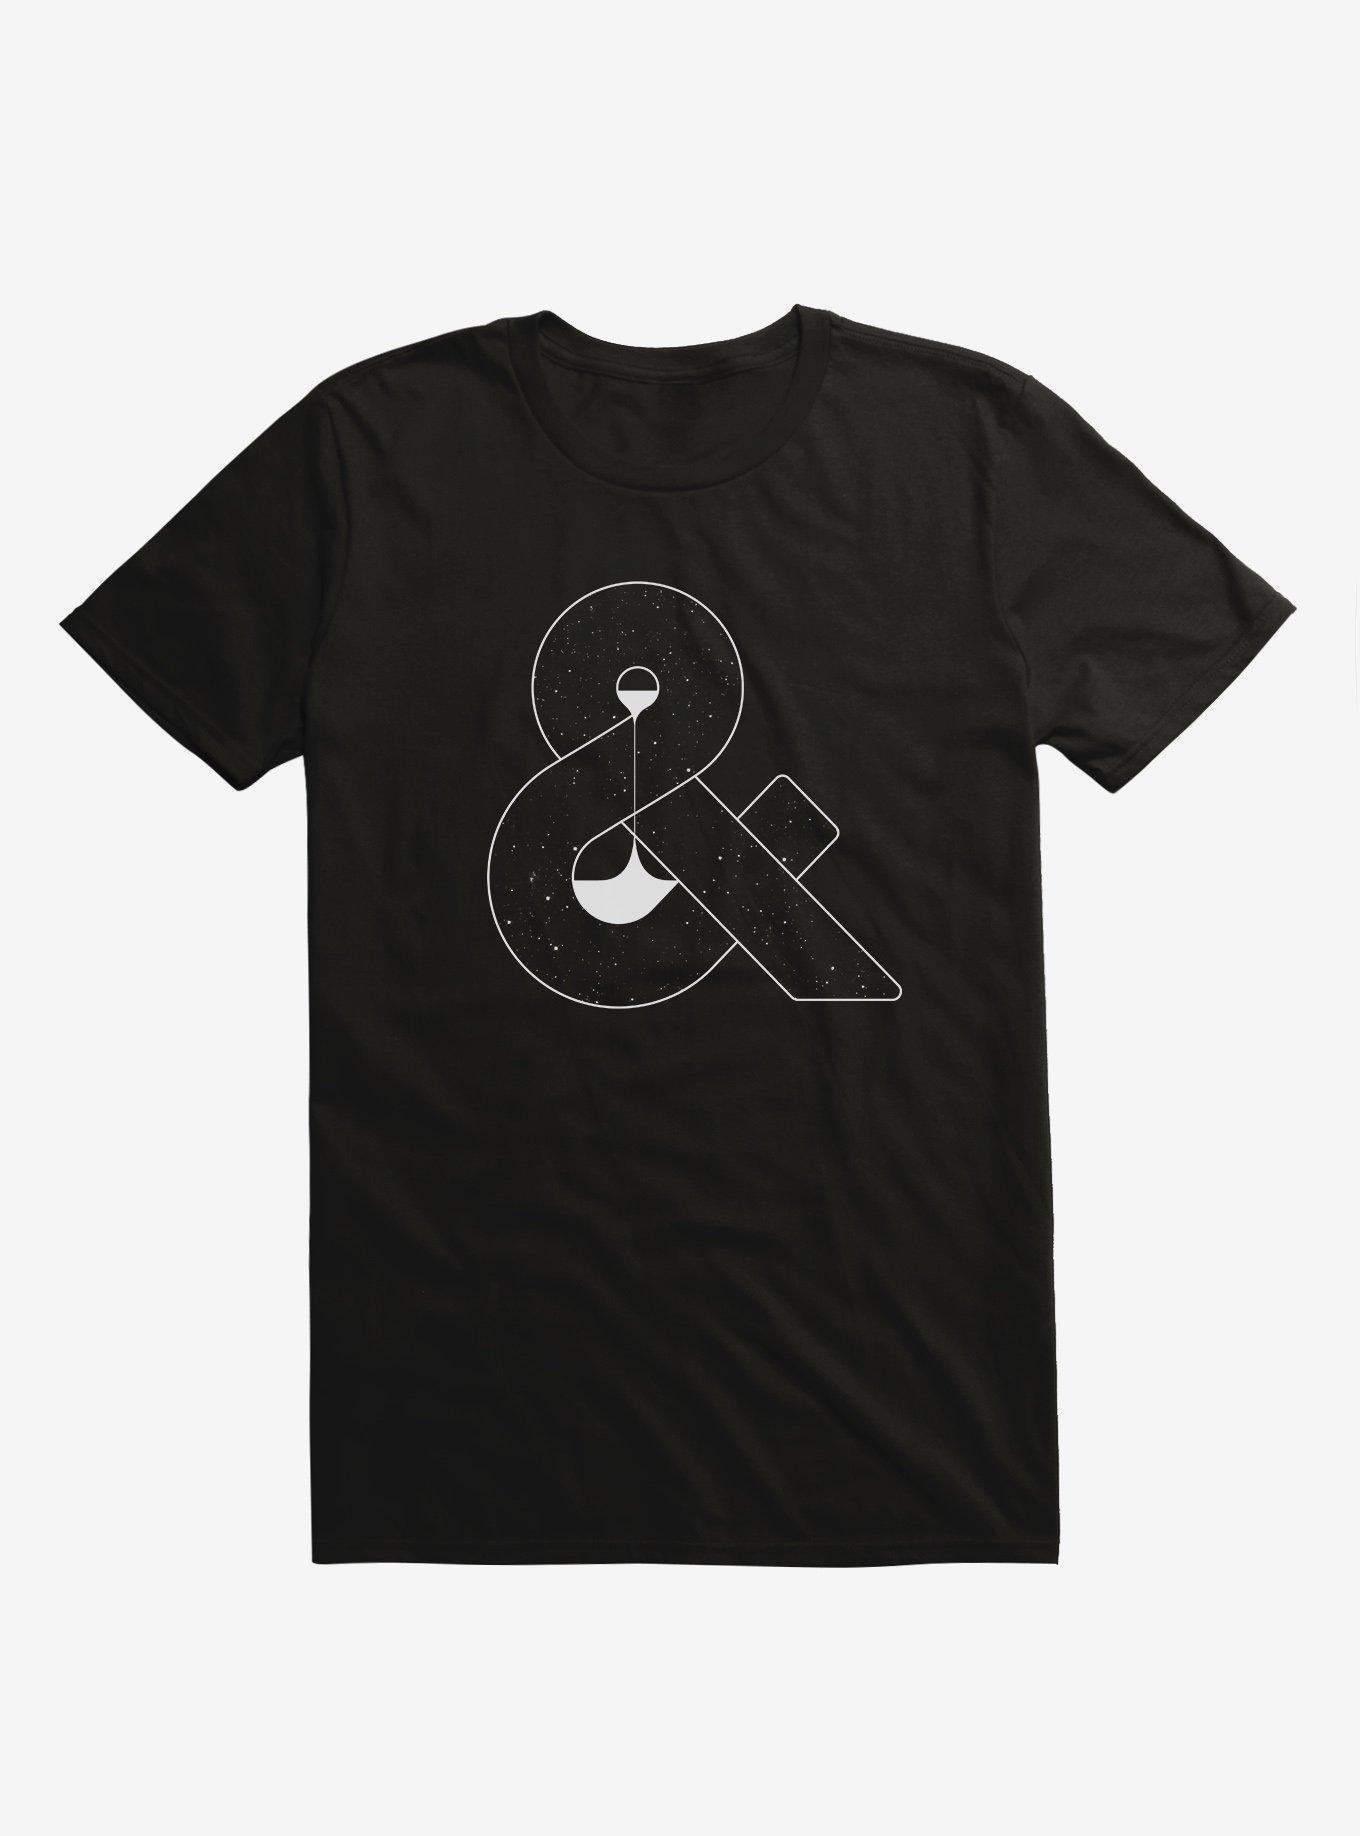 AMPERSAND BLACK | & And T-Shirt